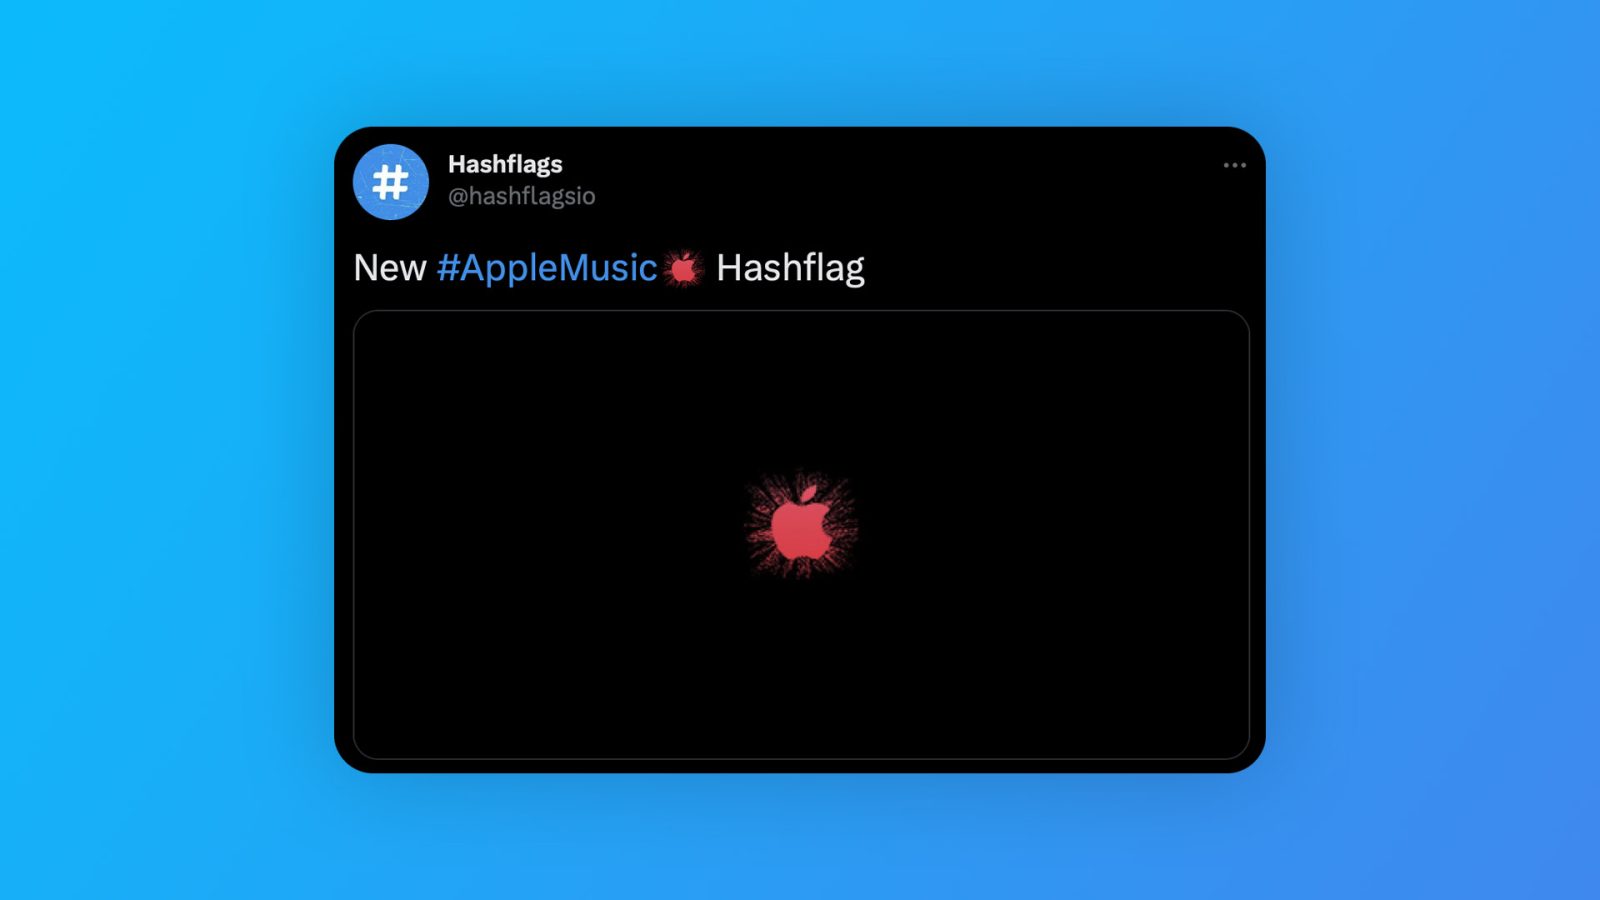 Twitter rolling out new #AppleMusic hashflag ahead of Super Bowl Halftime Show